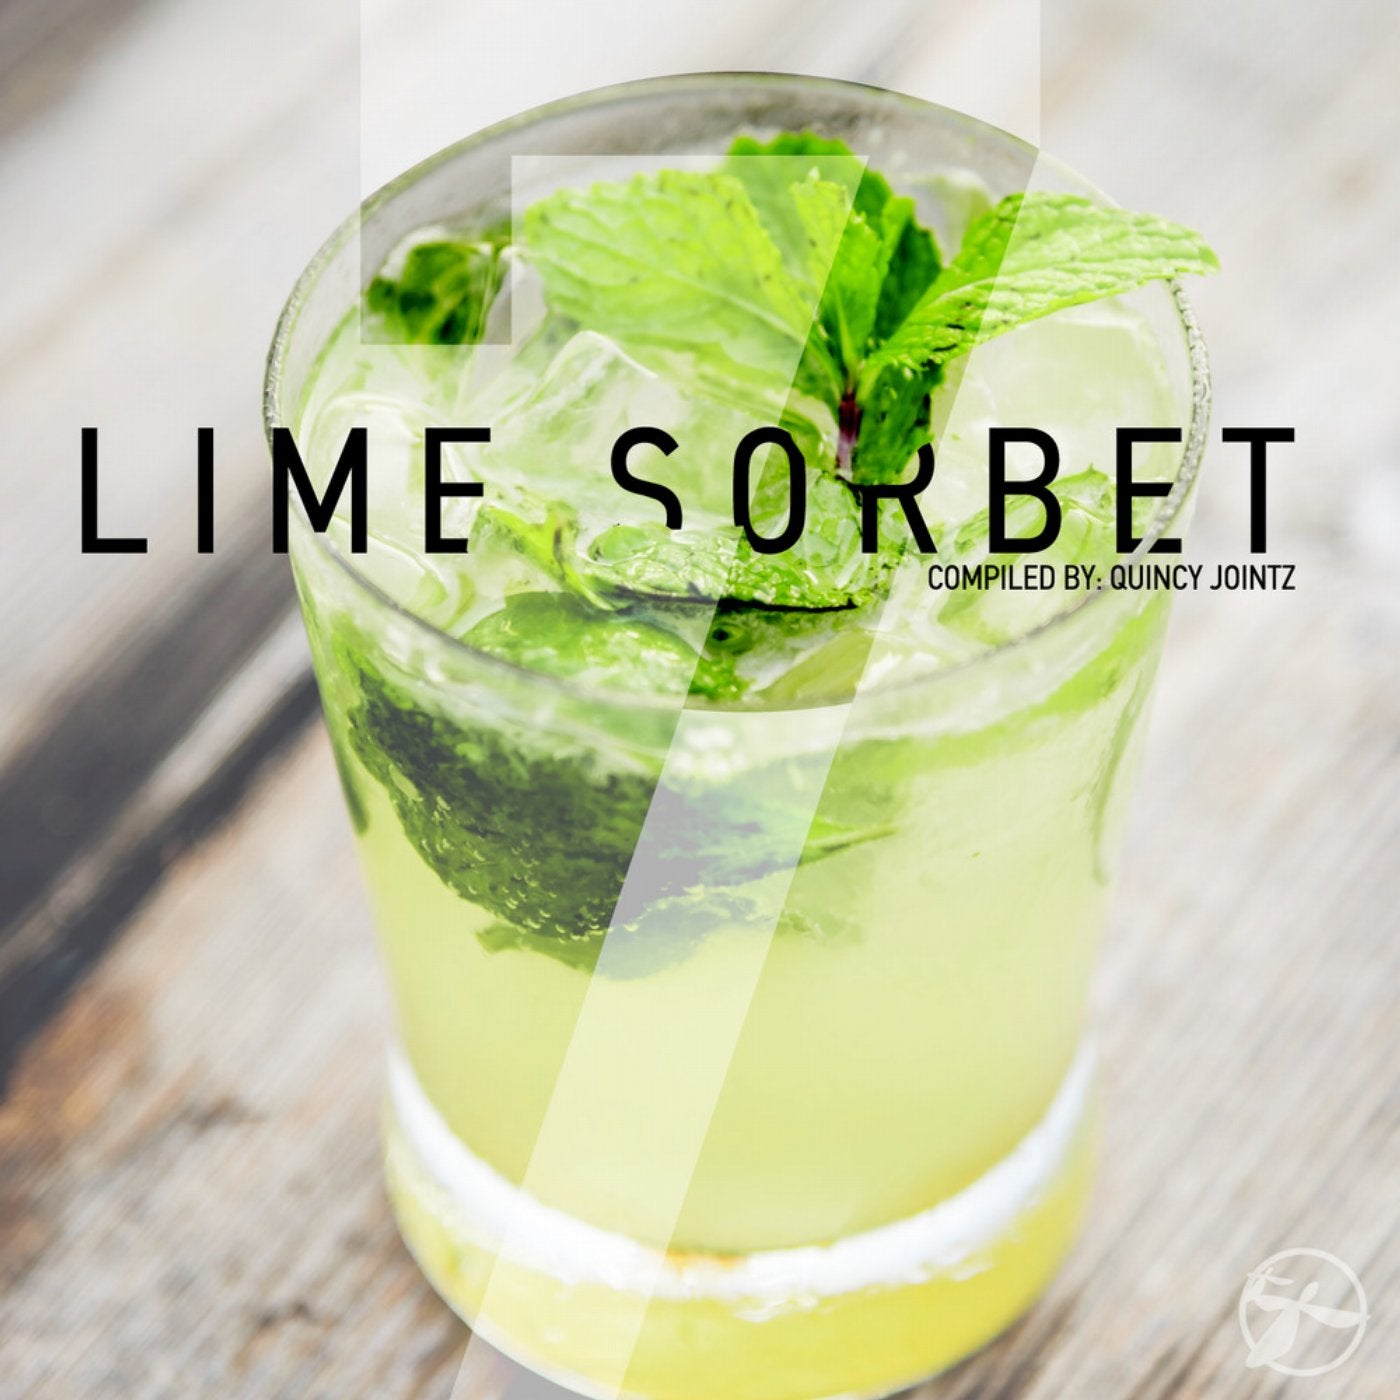 Lime Sorbet, Vol. 7 (Compiled by Quincy Jointz)